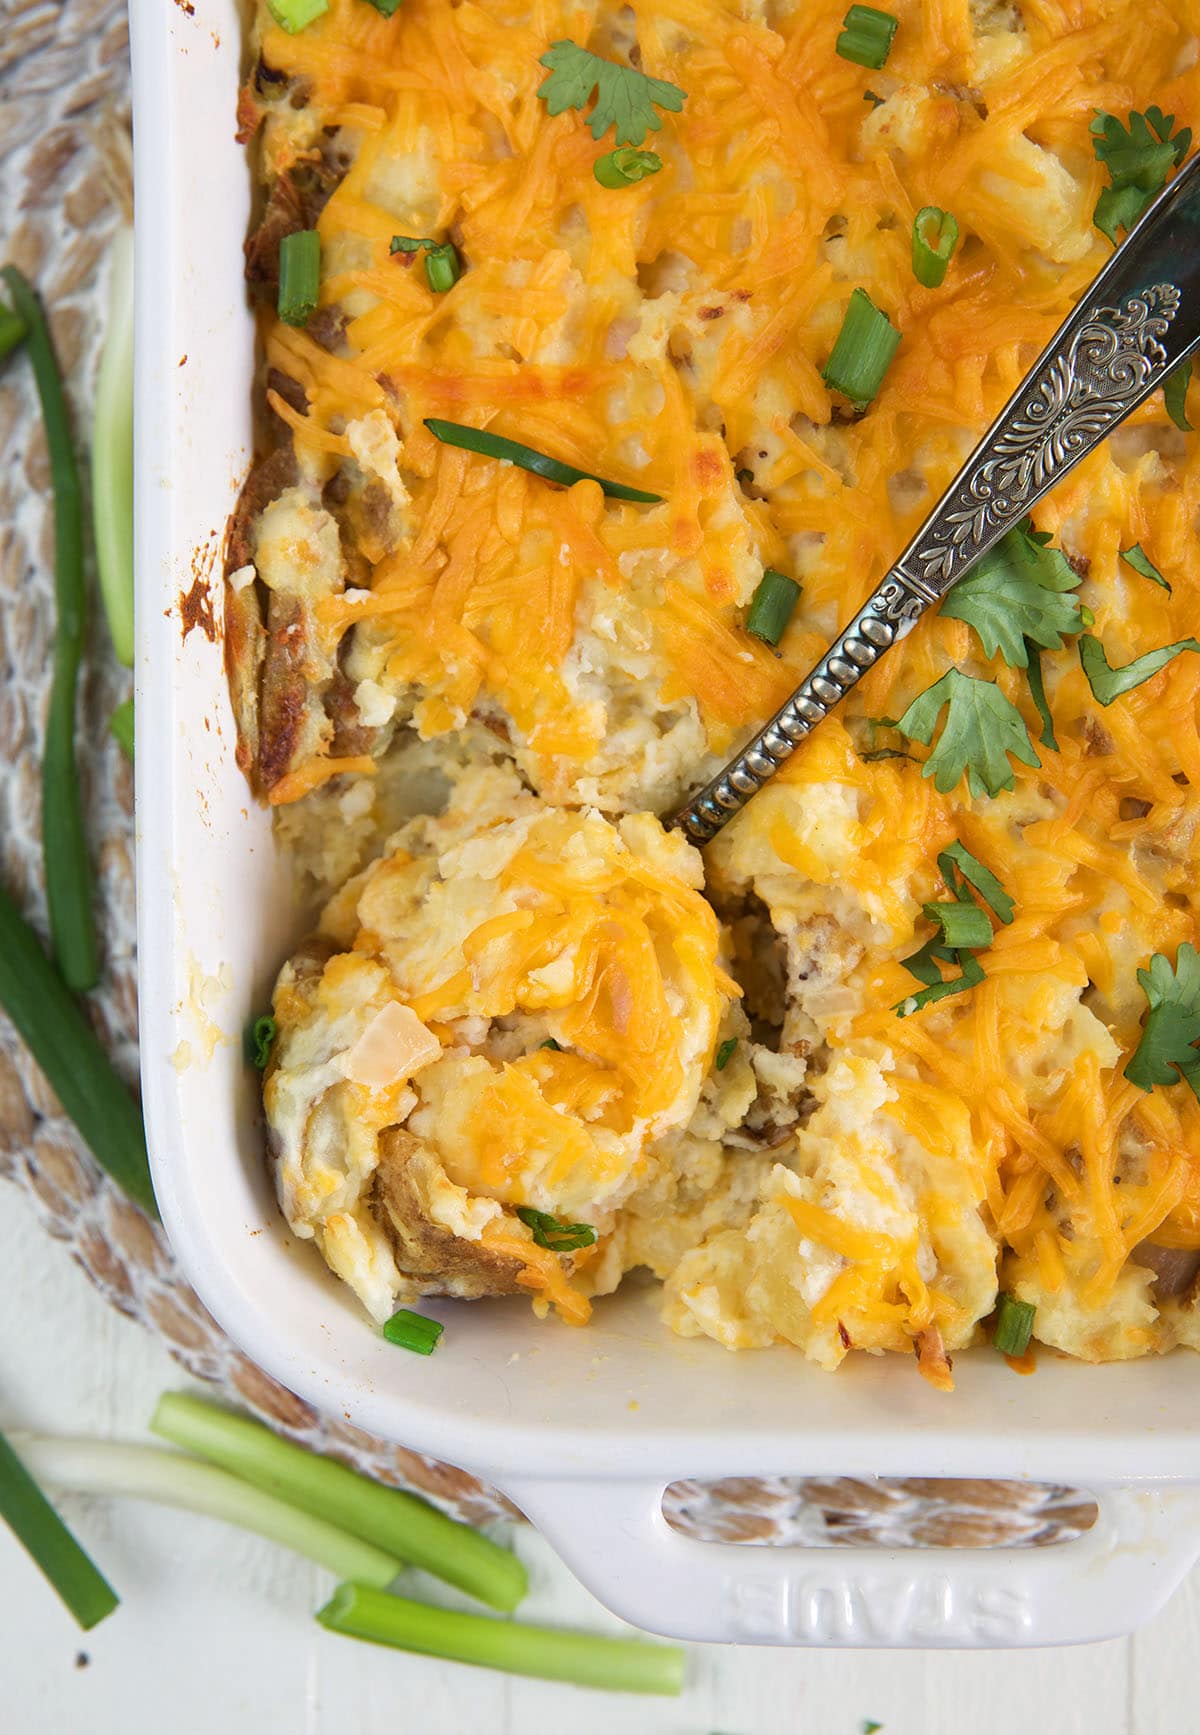 A large serving spoon is dipping into a casserole dish filled with cheesy potatoes.